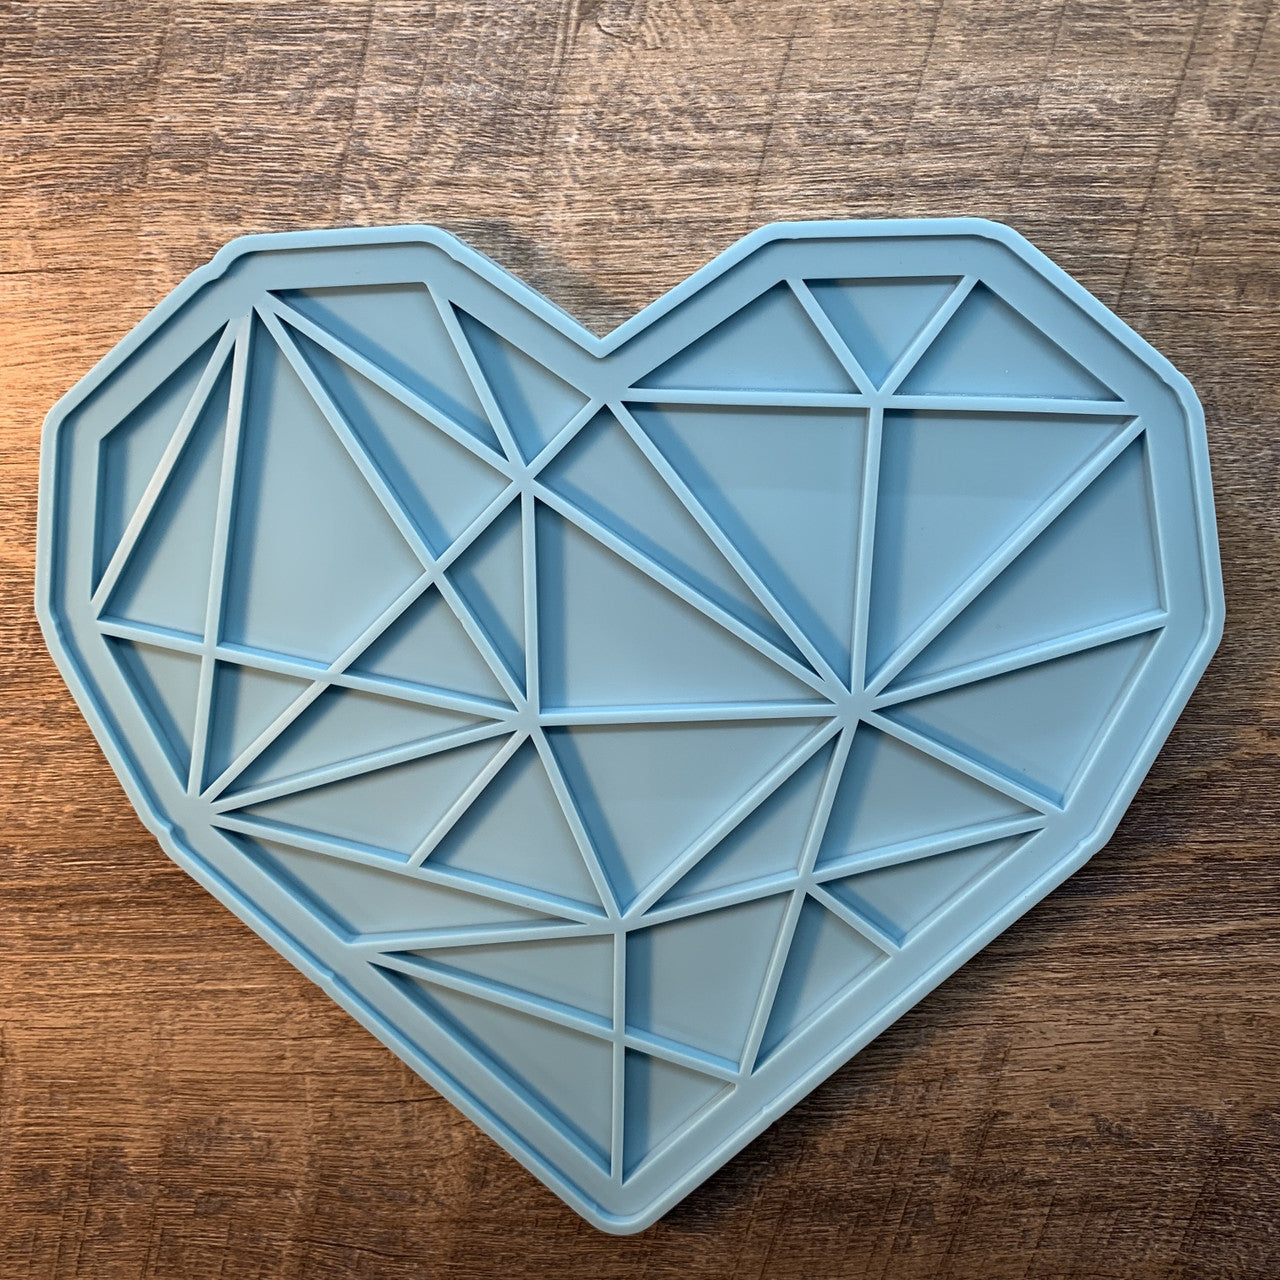 Geometric Mosaic Heart Silicone Mold for Epoxy Resin Art DIY Craft LARGE